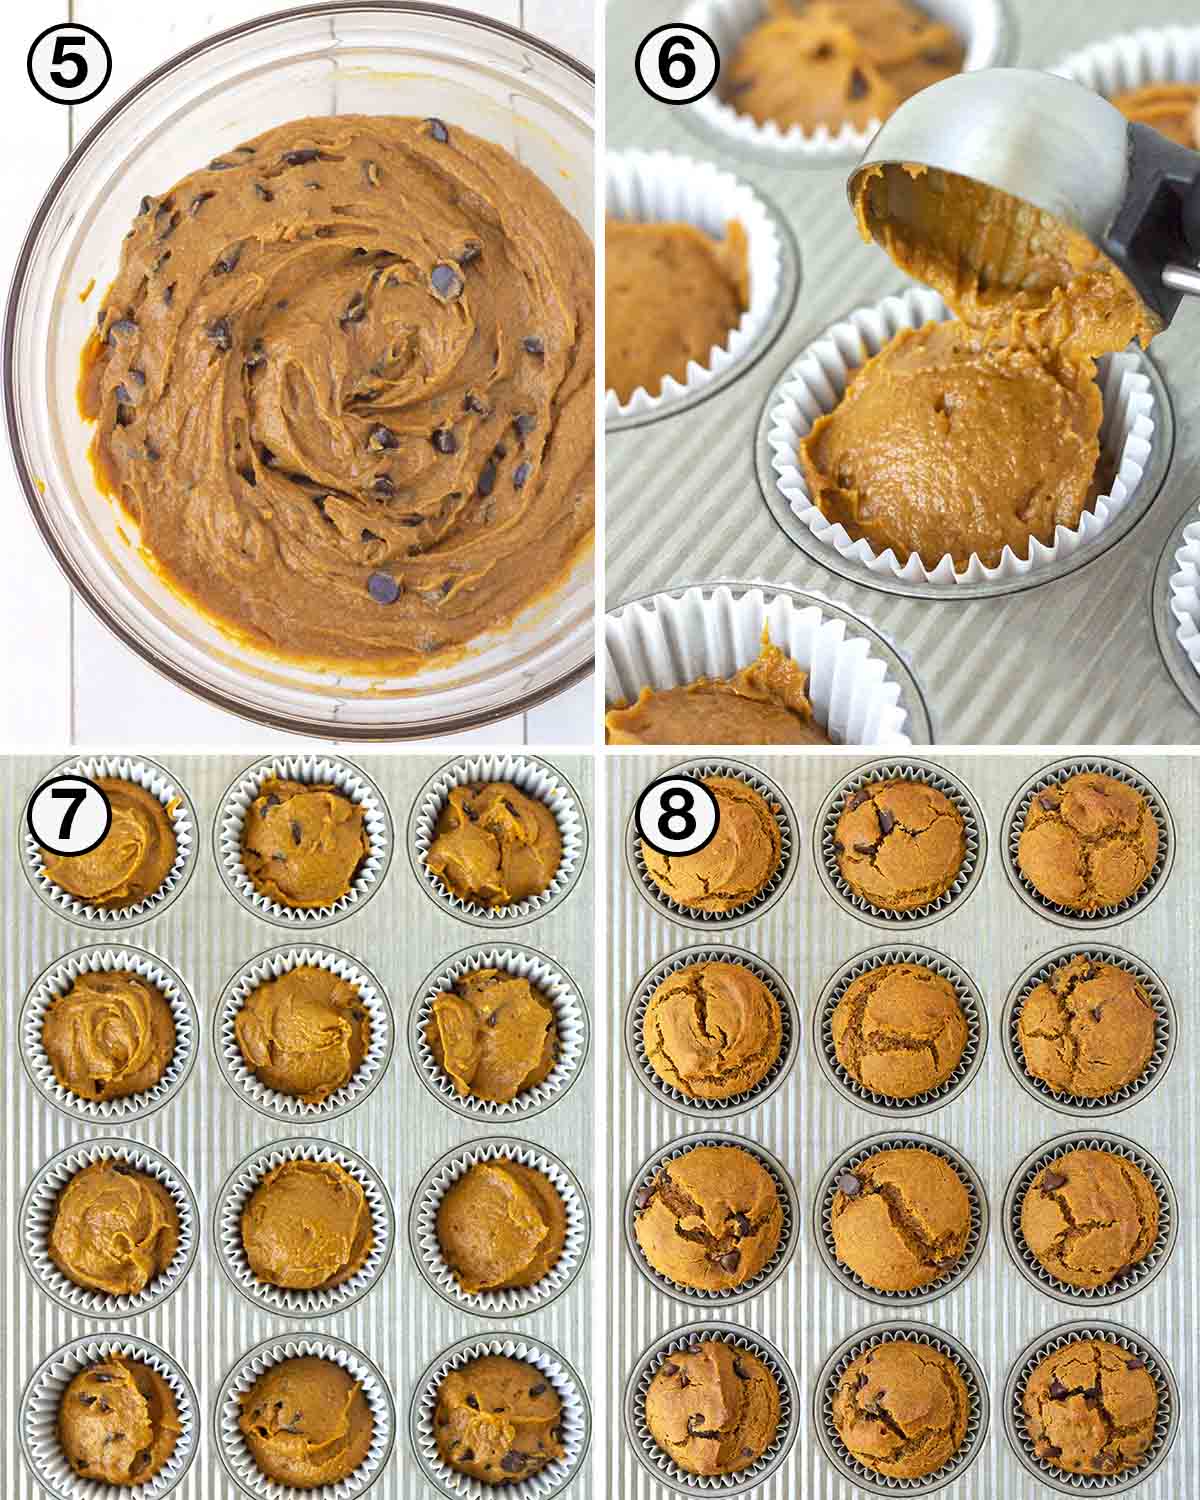 A collage of four images showing the second sequence of steps needed to make vegan gluten-free pumpkin muffins.